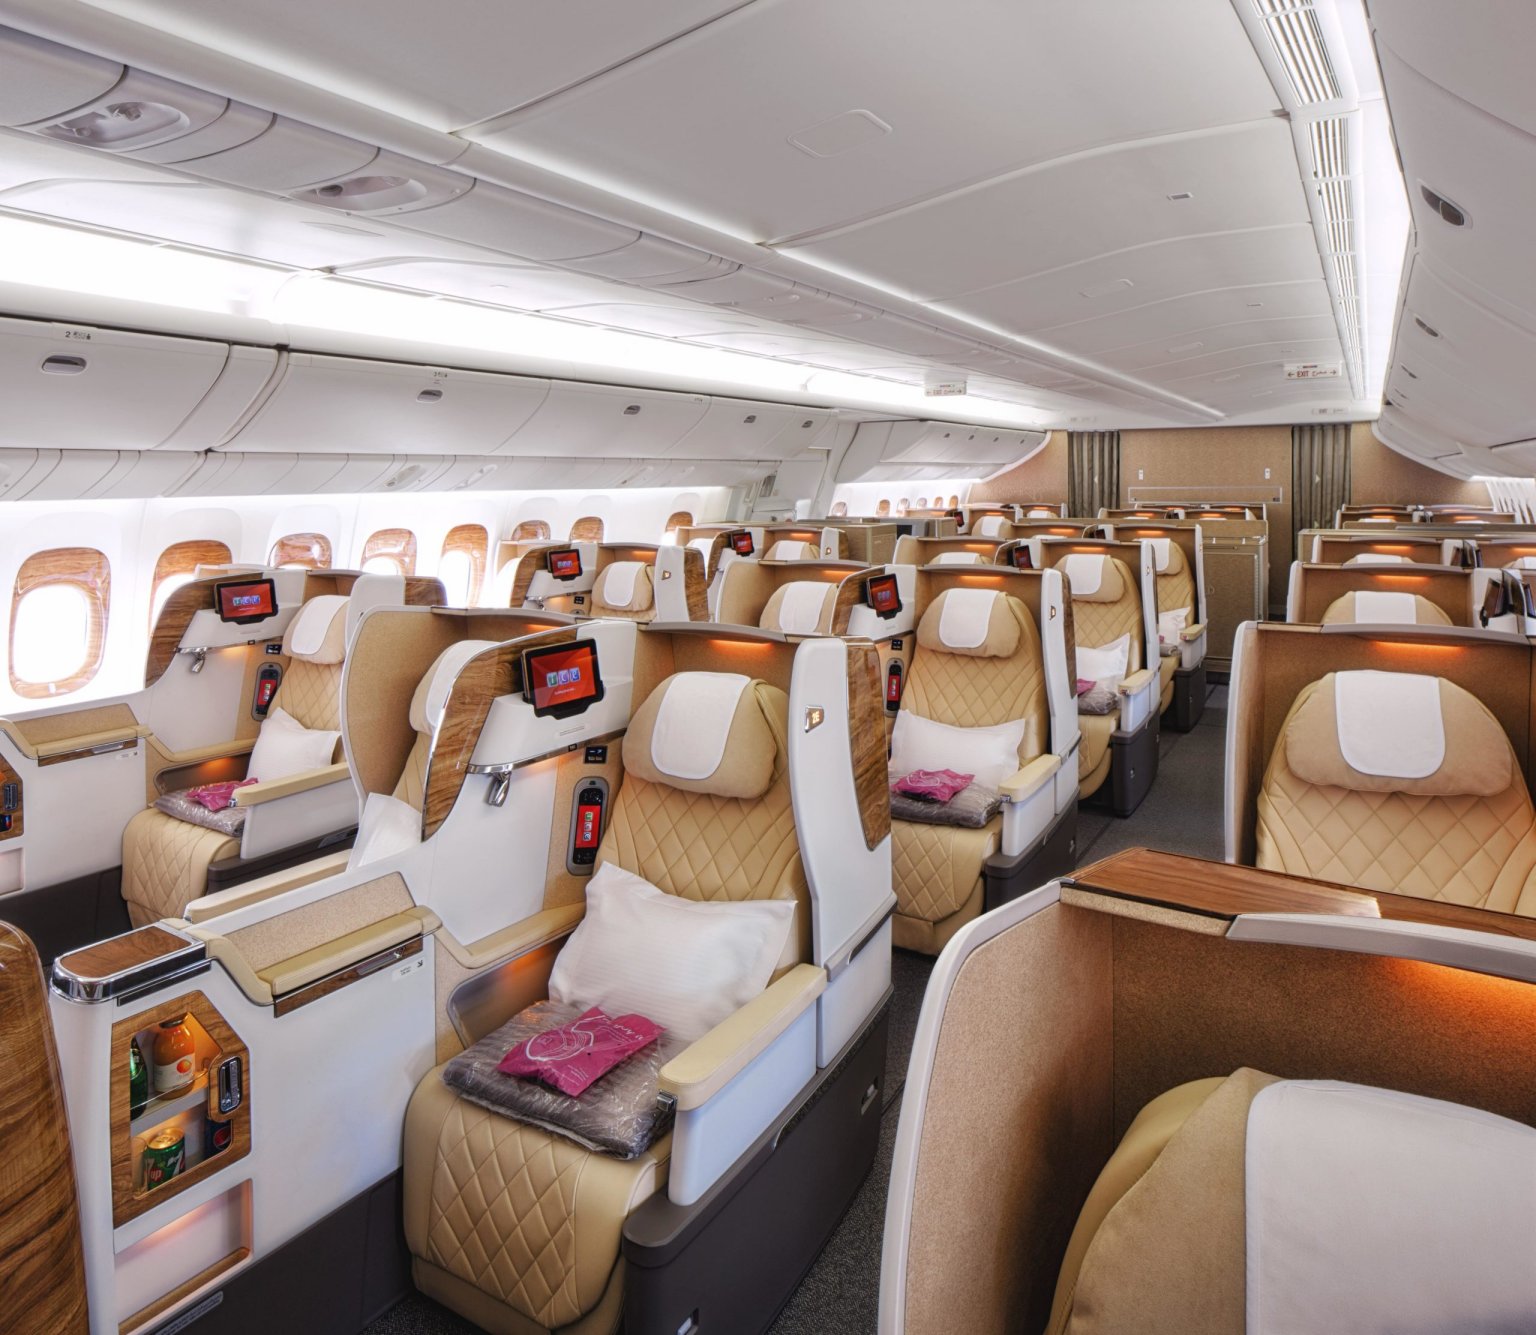 Emirates unveils new business class layout for their Boeing 777200LR